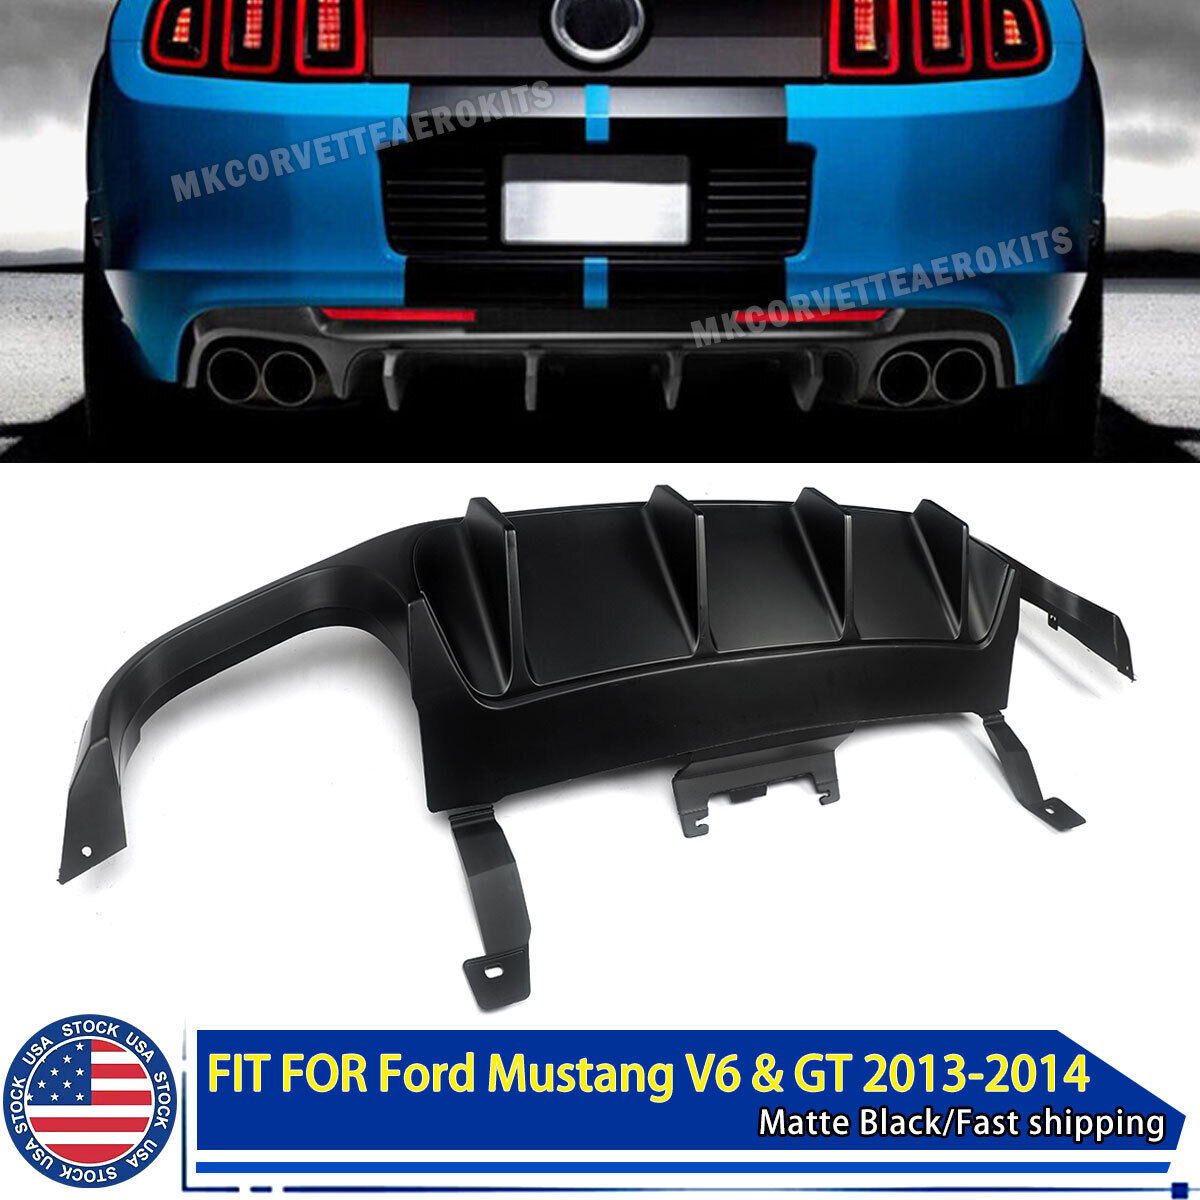 Fits 13-14 Ford Mustang V6 & GT Shelby GT500 Style Rear Bumper Diffuser Black US